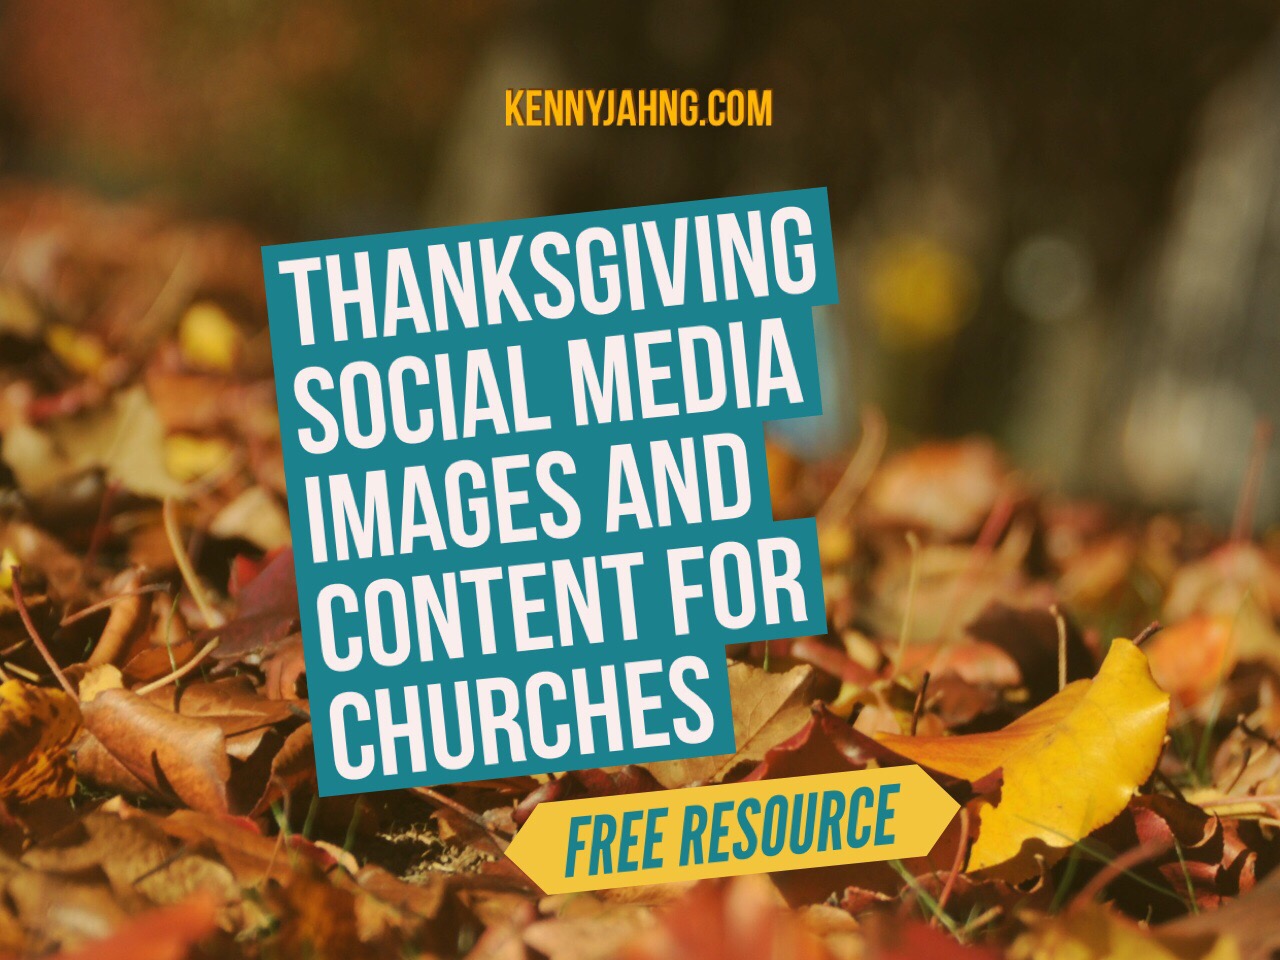 Thanksgiving Social Media Images and Content for Churches